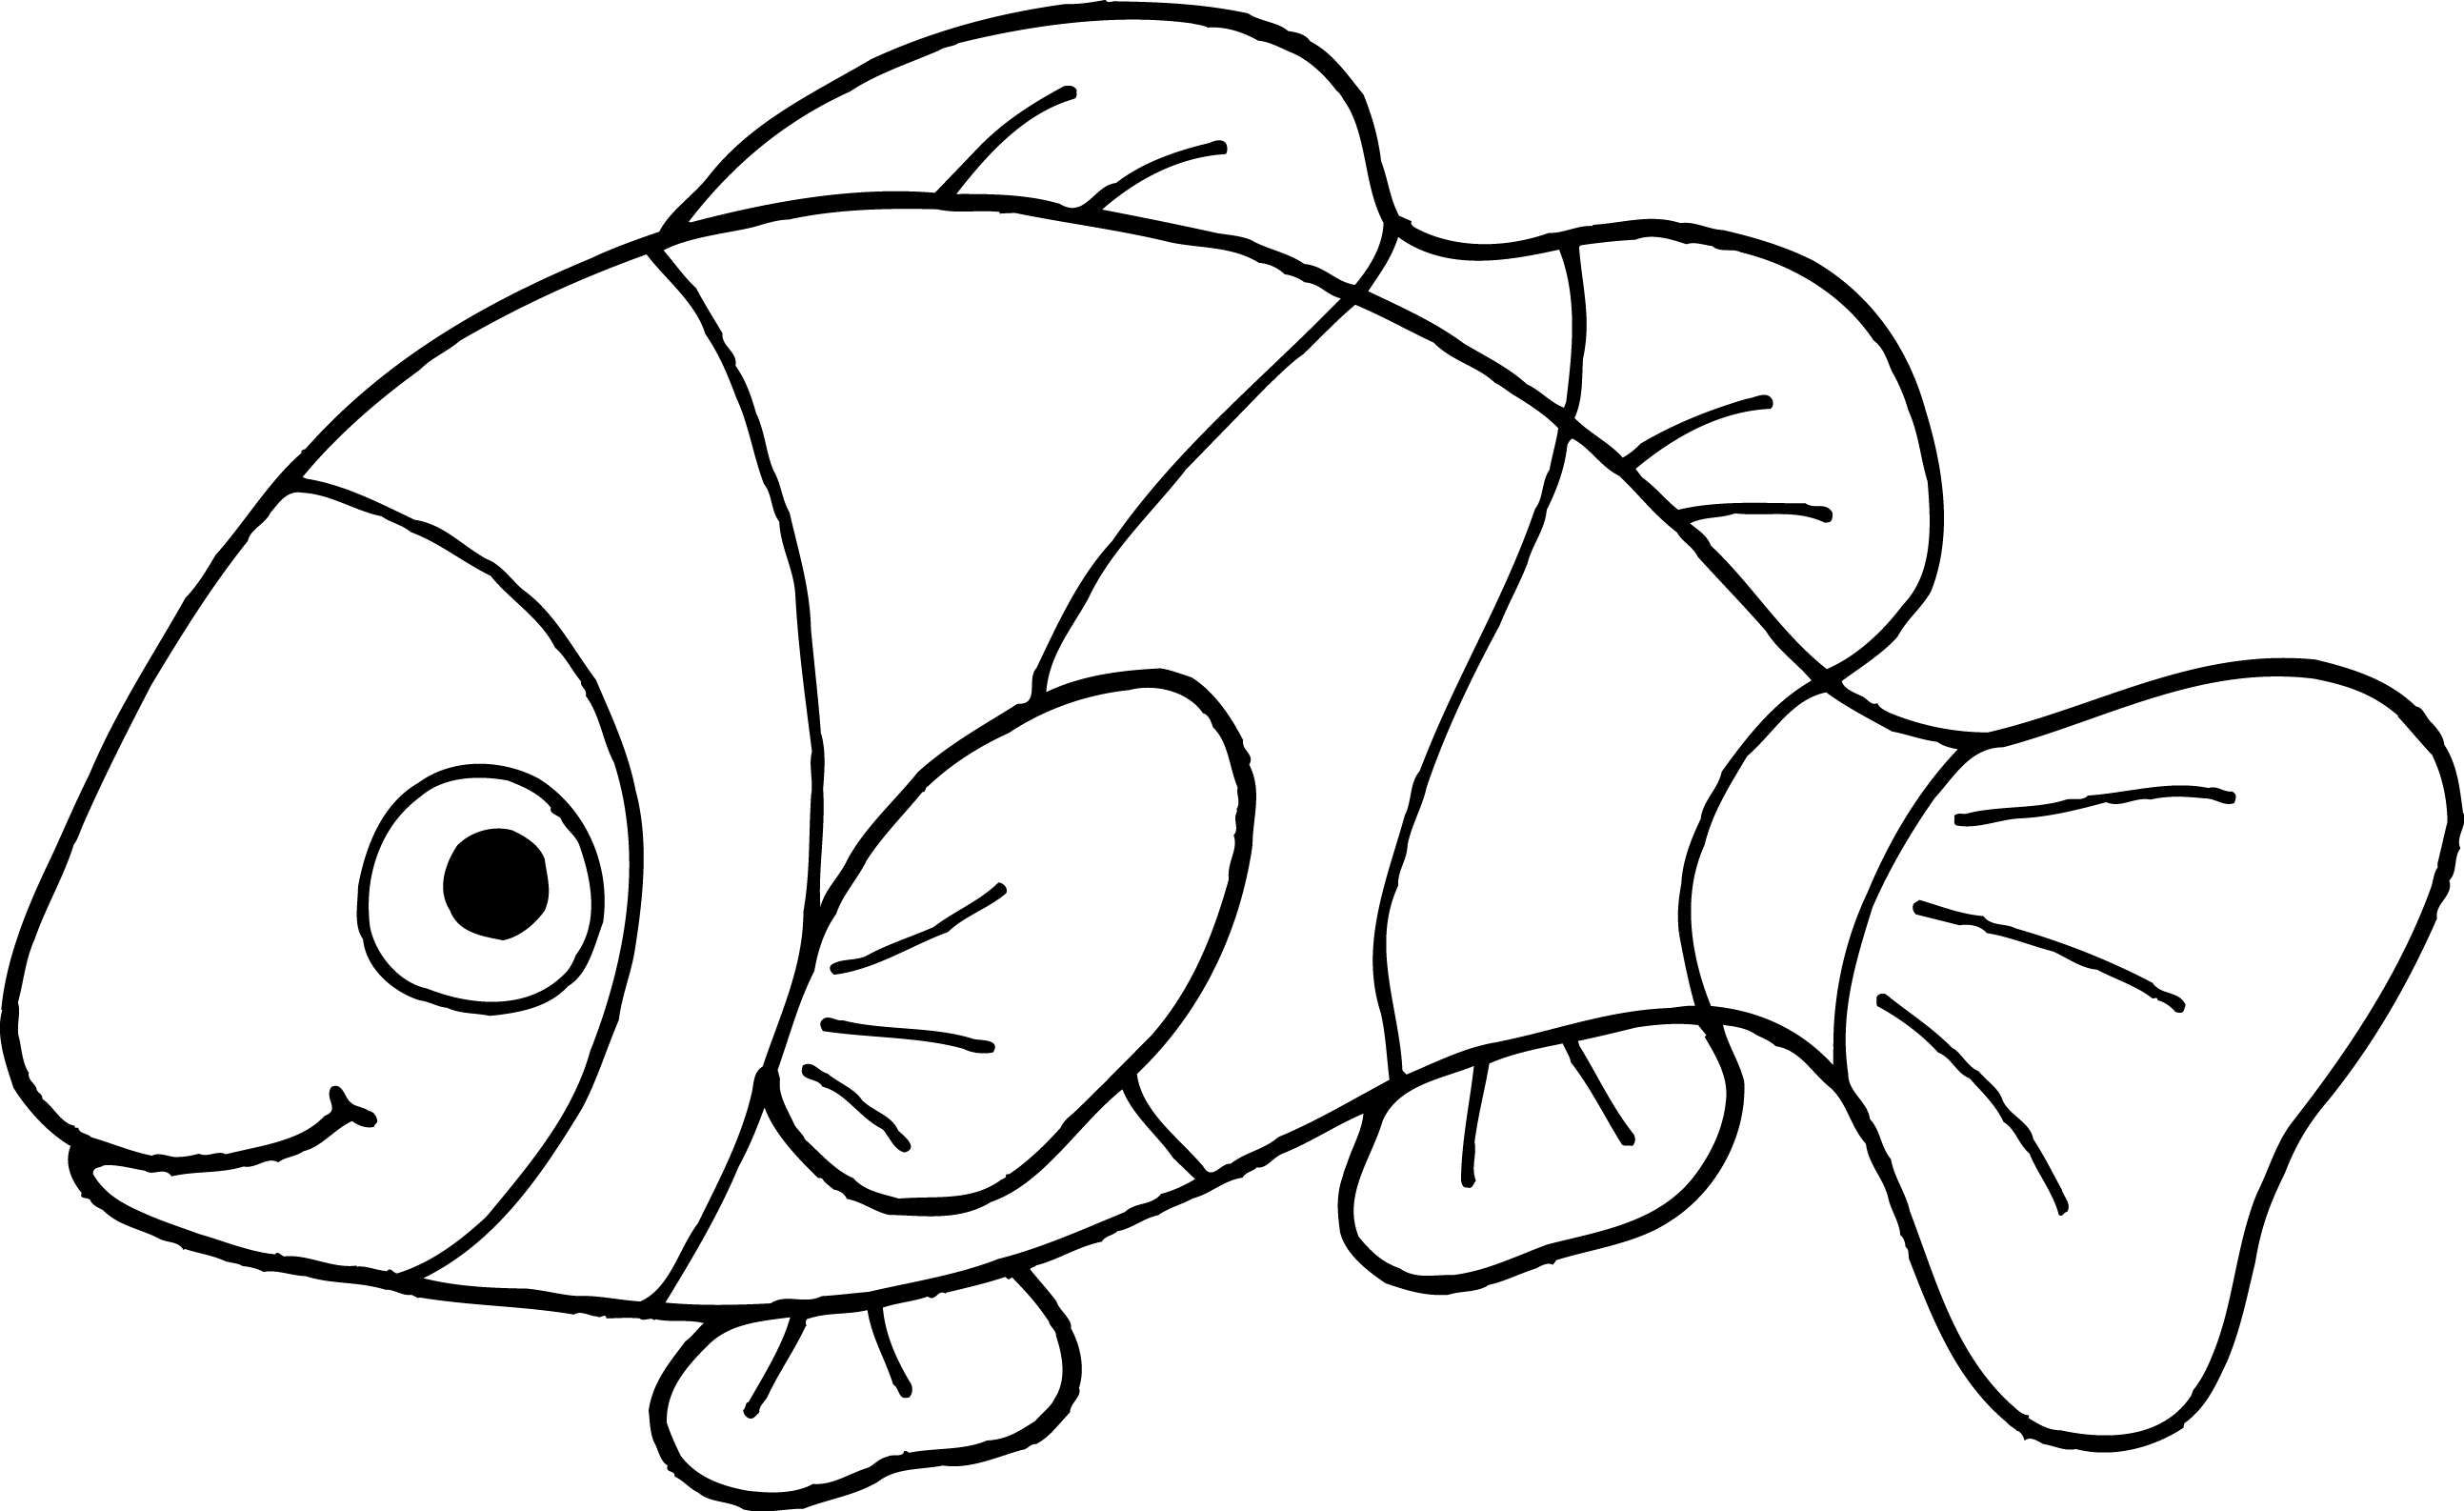 Clown fish clipart black and white stock rr png